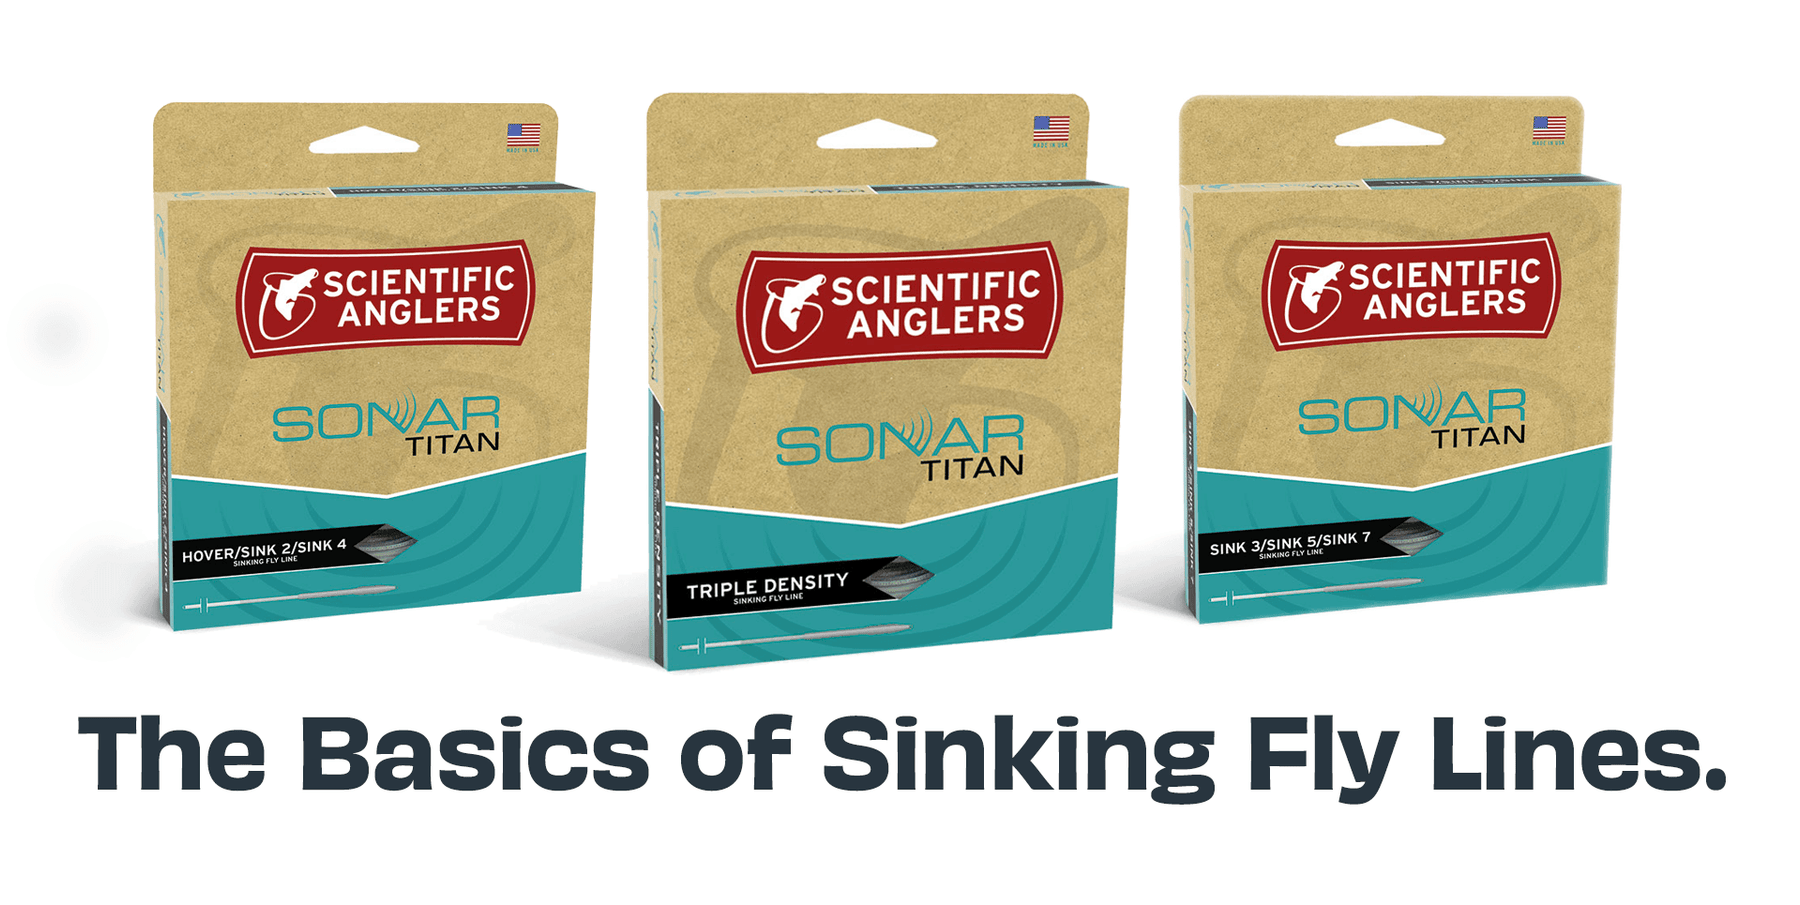 The Basics of Sinking Fly Lines